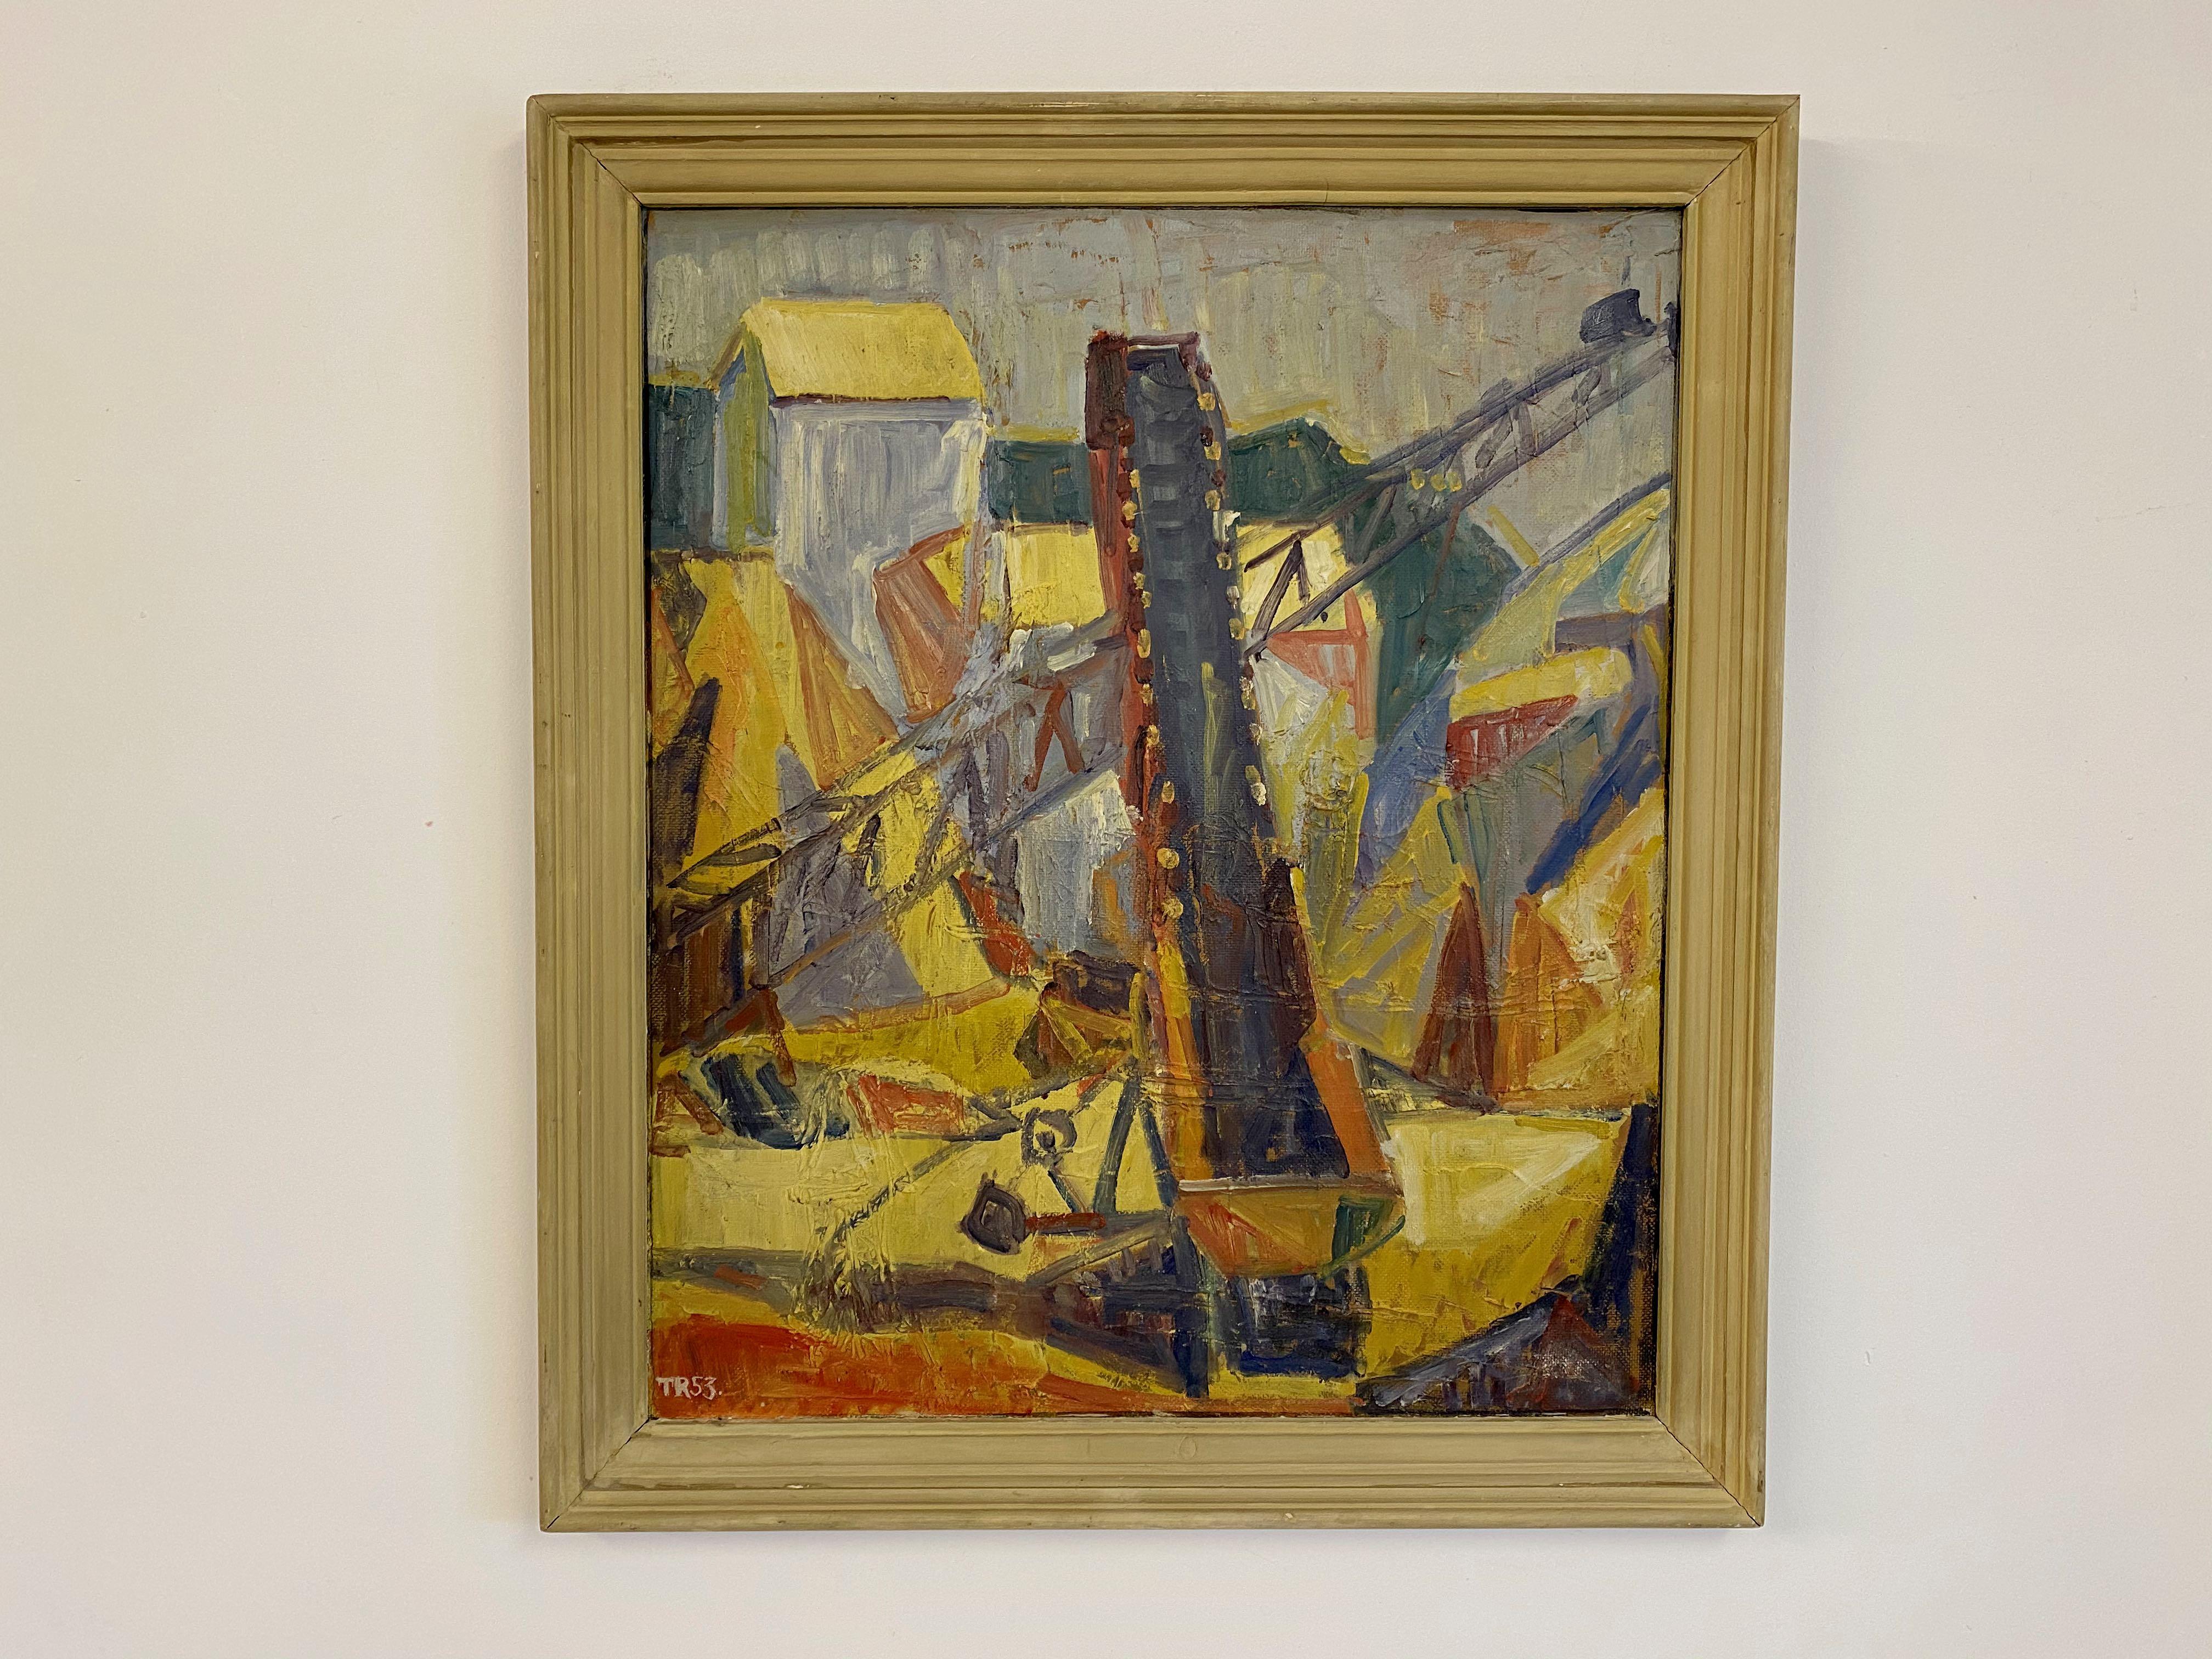 Oil on board

Wooden frame

Danish

Signed and dated 1953.